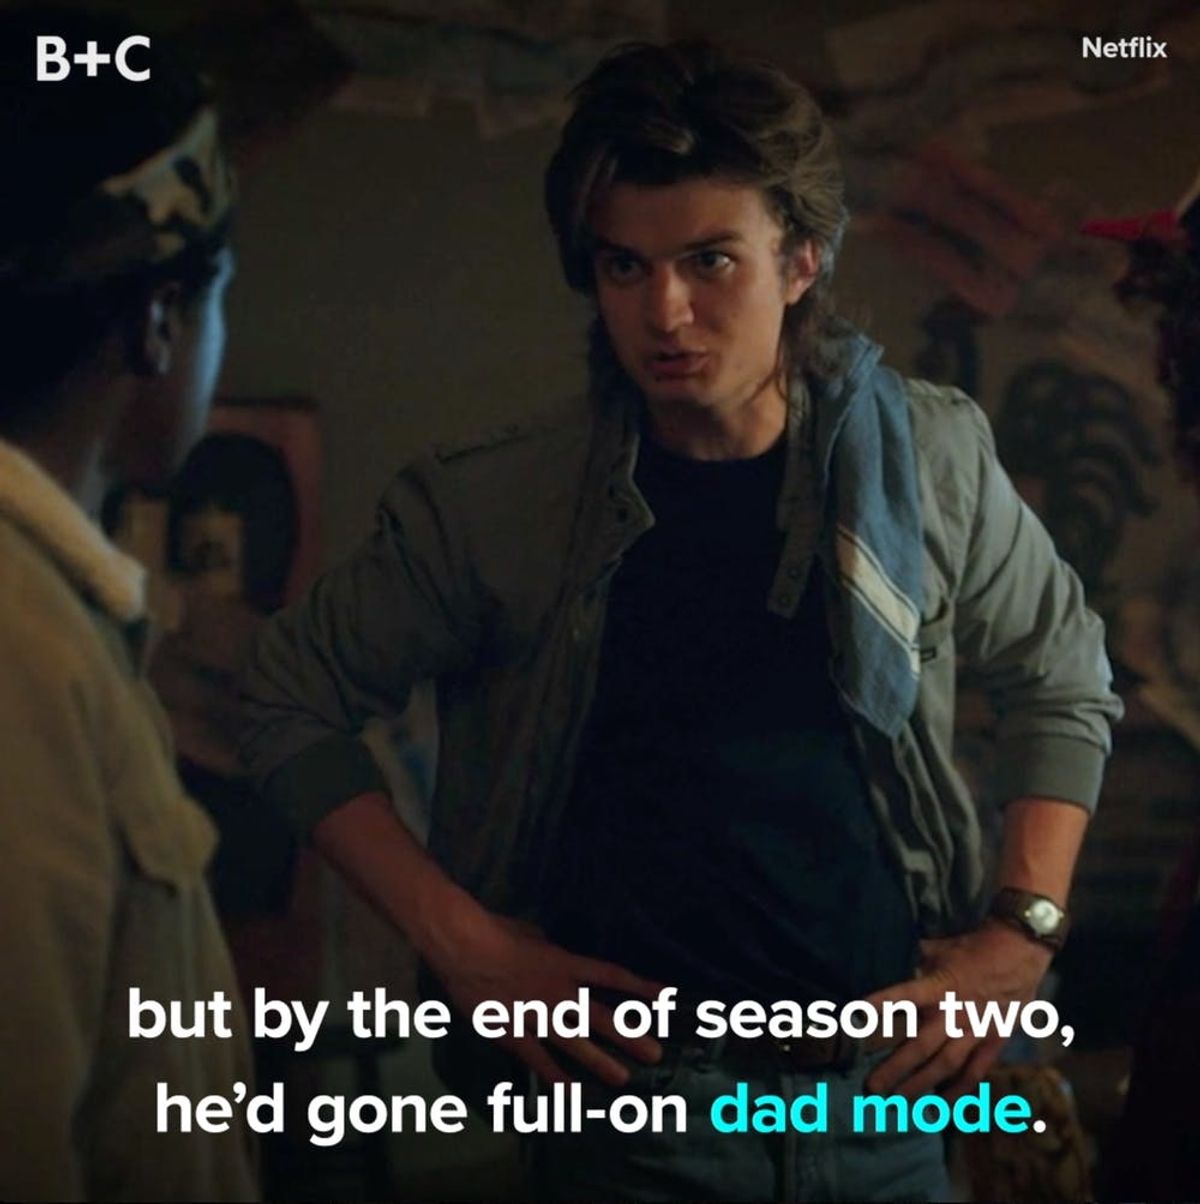 Steve From ‘Stranger Things’ Is a Total Dad